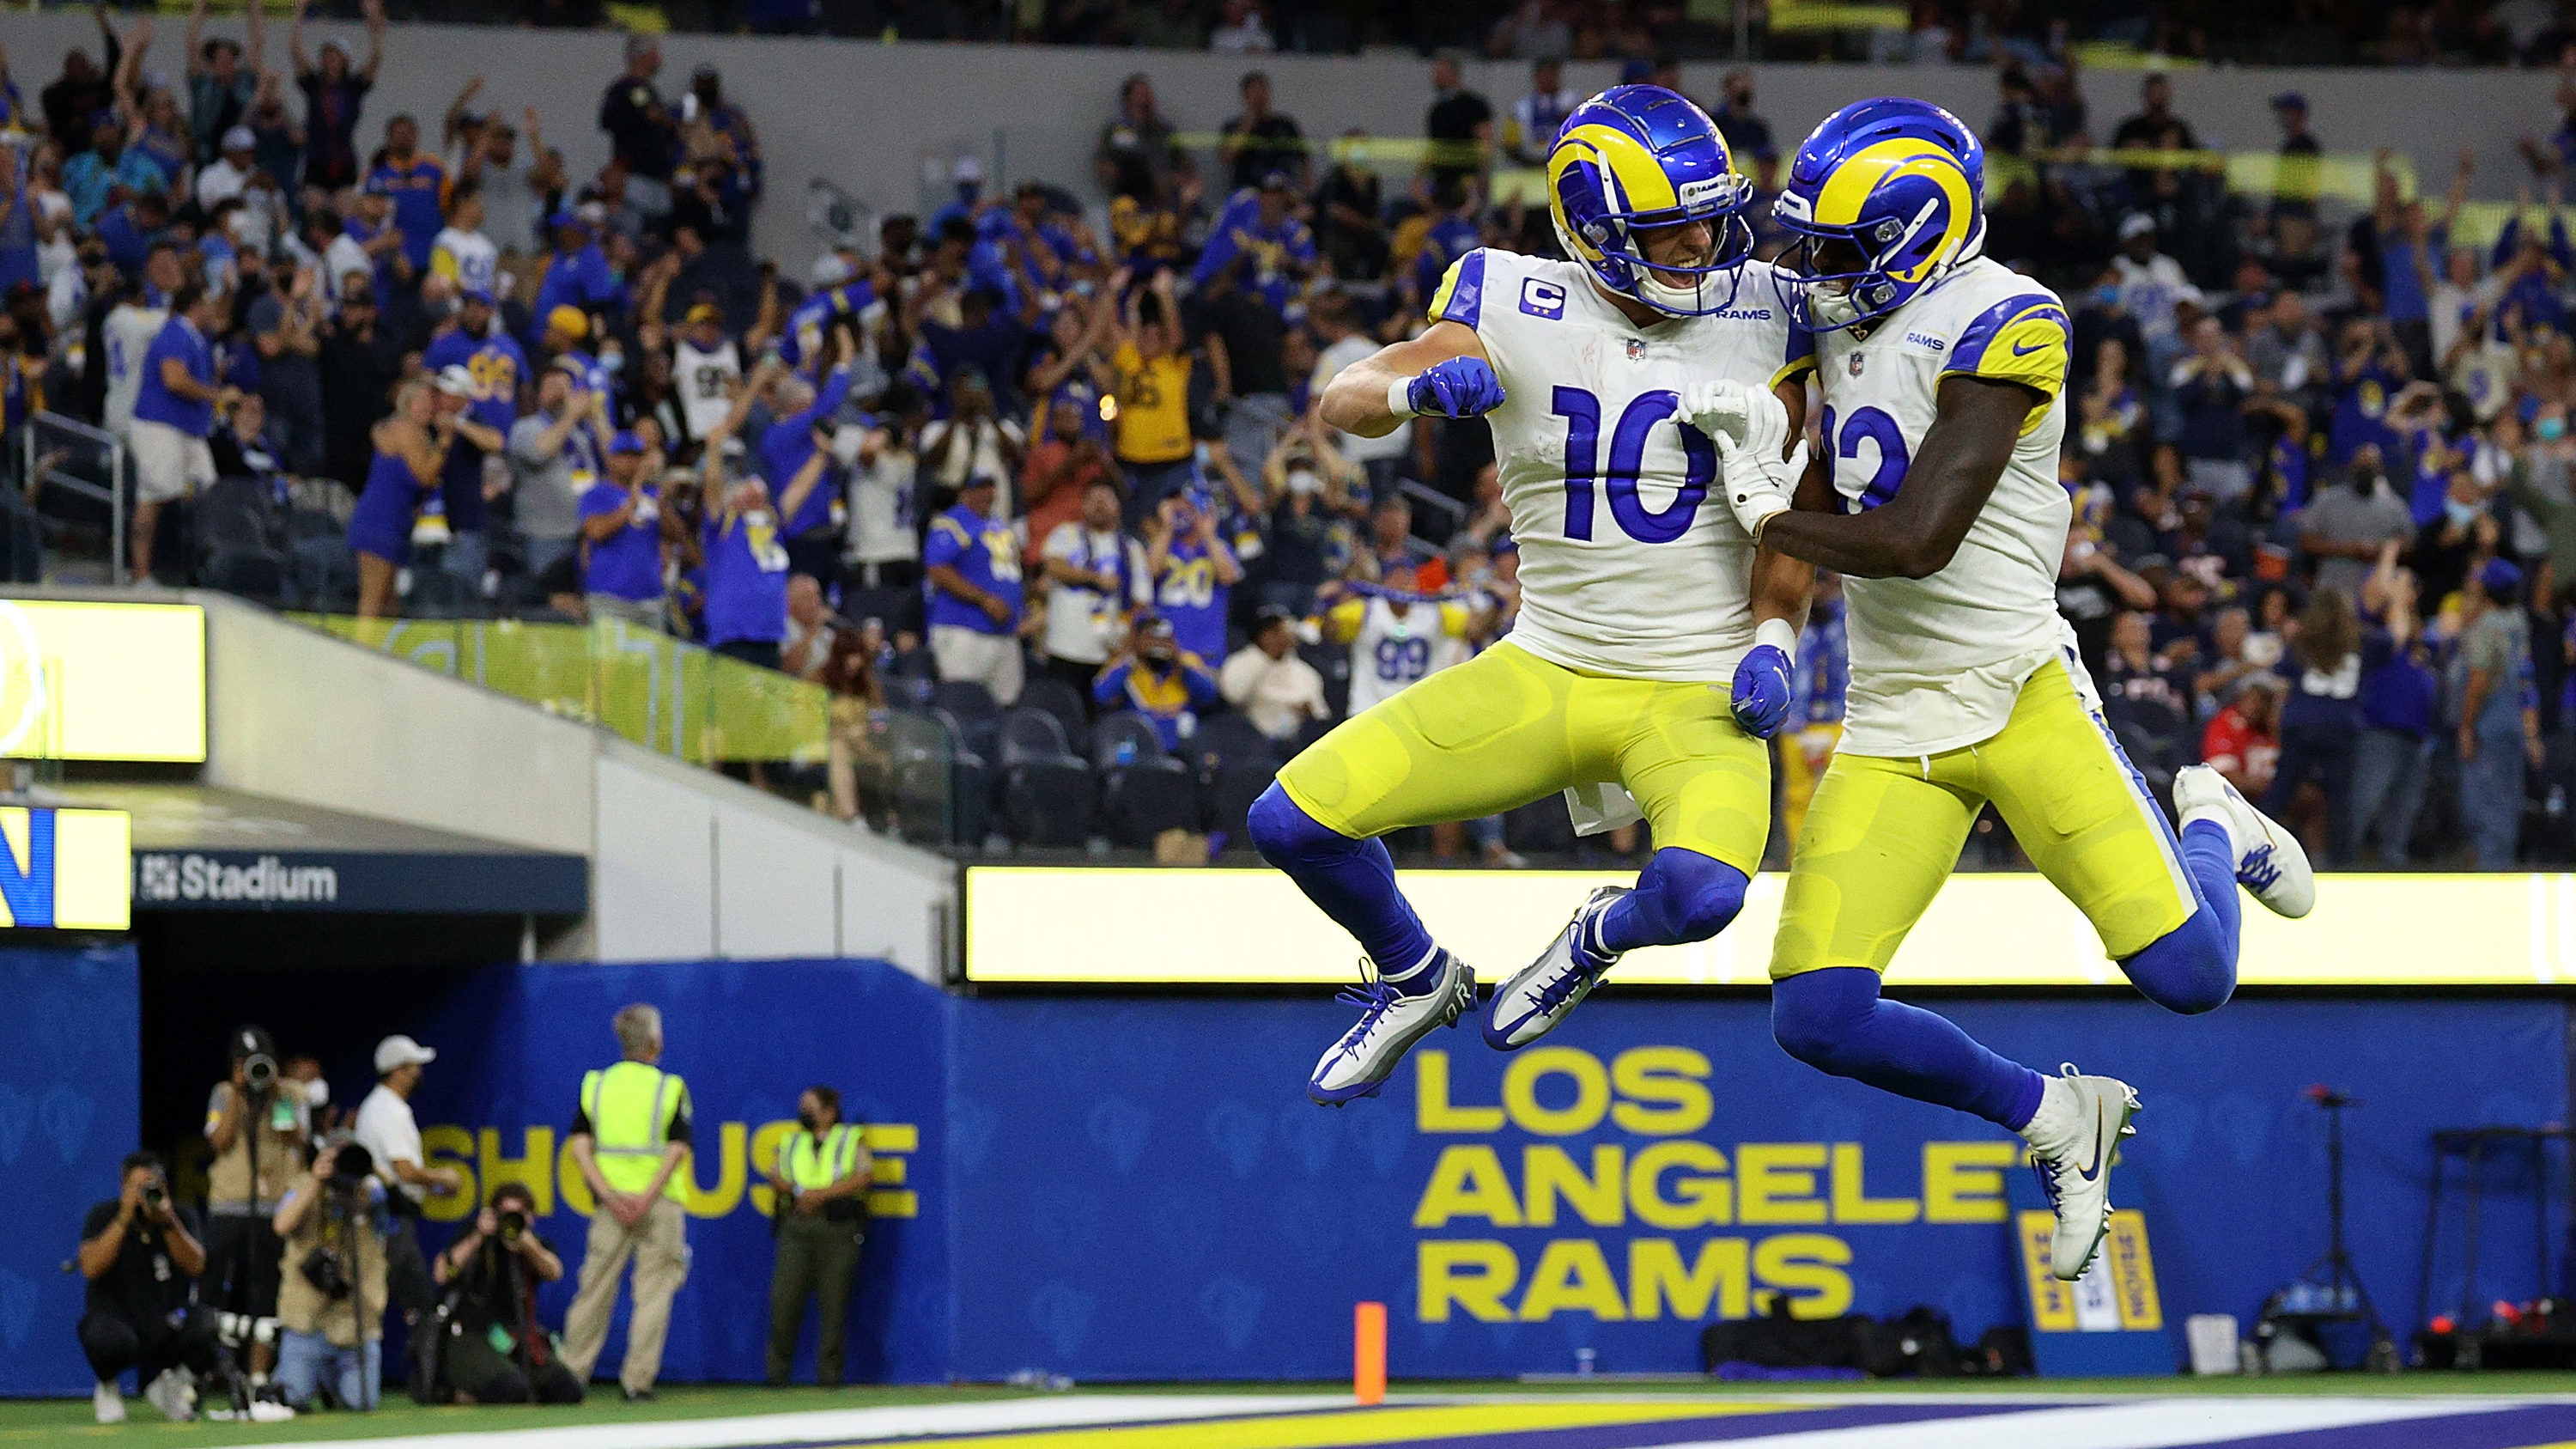 Bills vs. Rams odds, picks and player props for TNF provided by FanDuel 